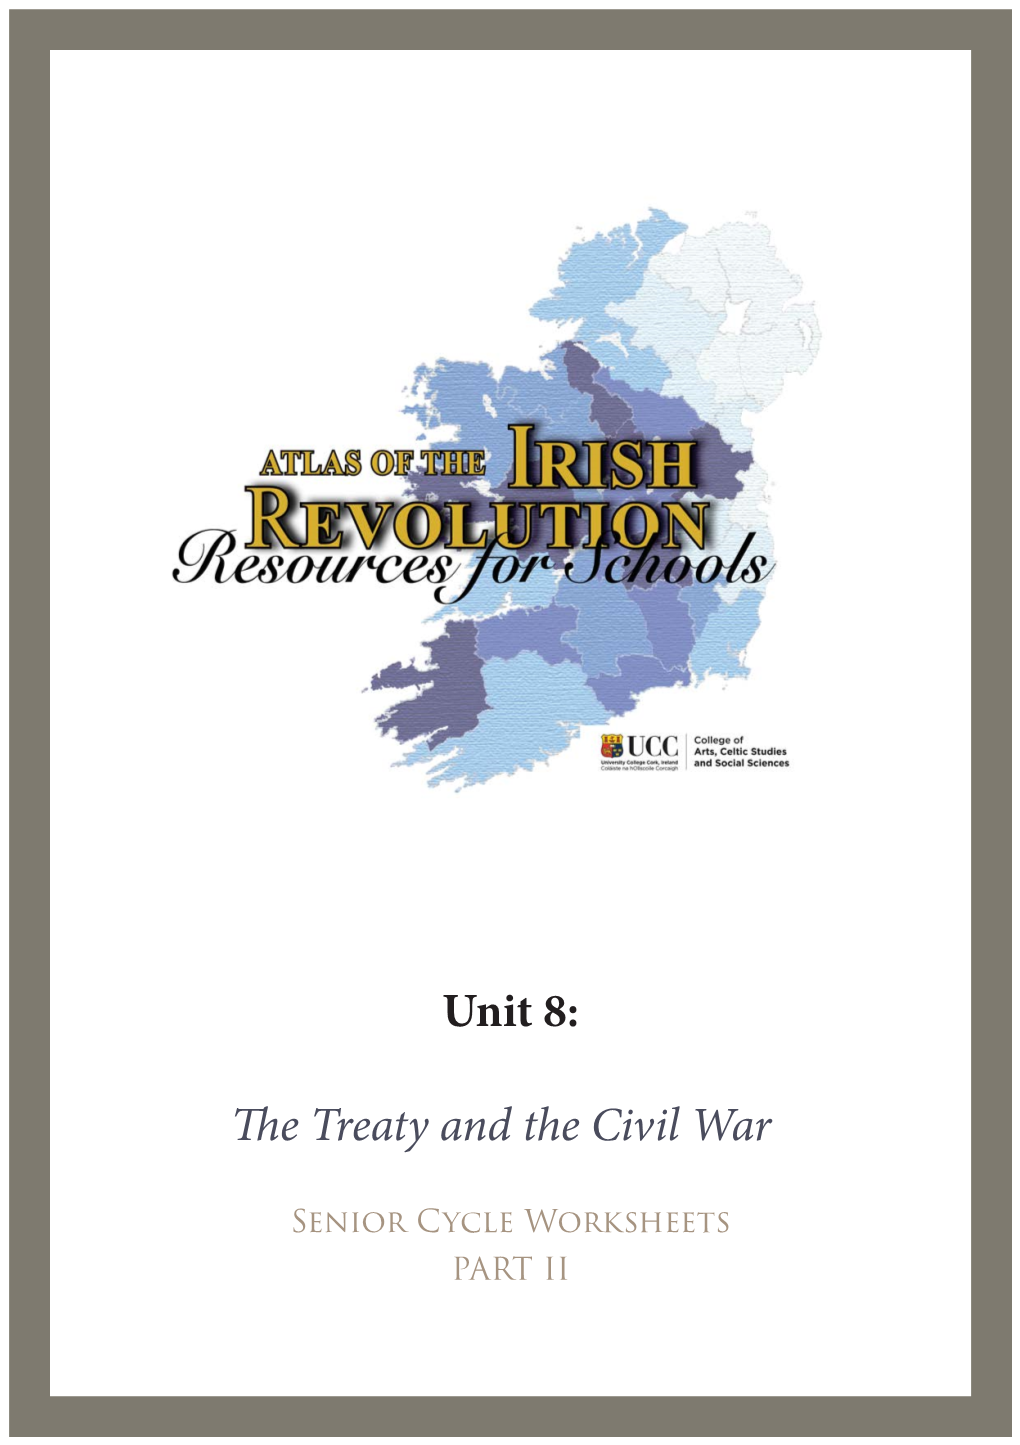 The Treaty and the Civil War